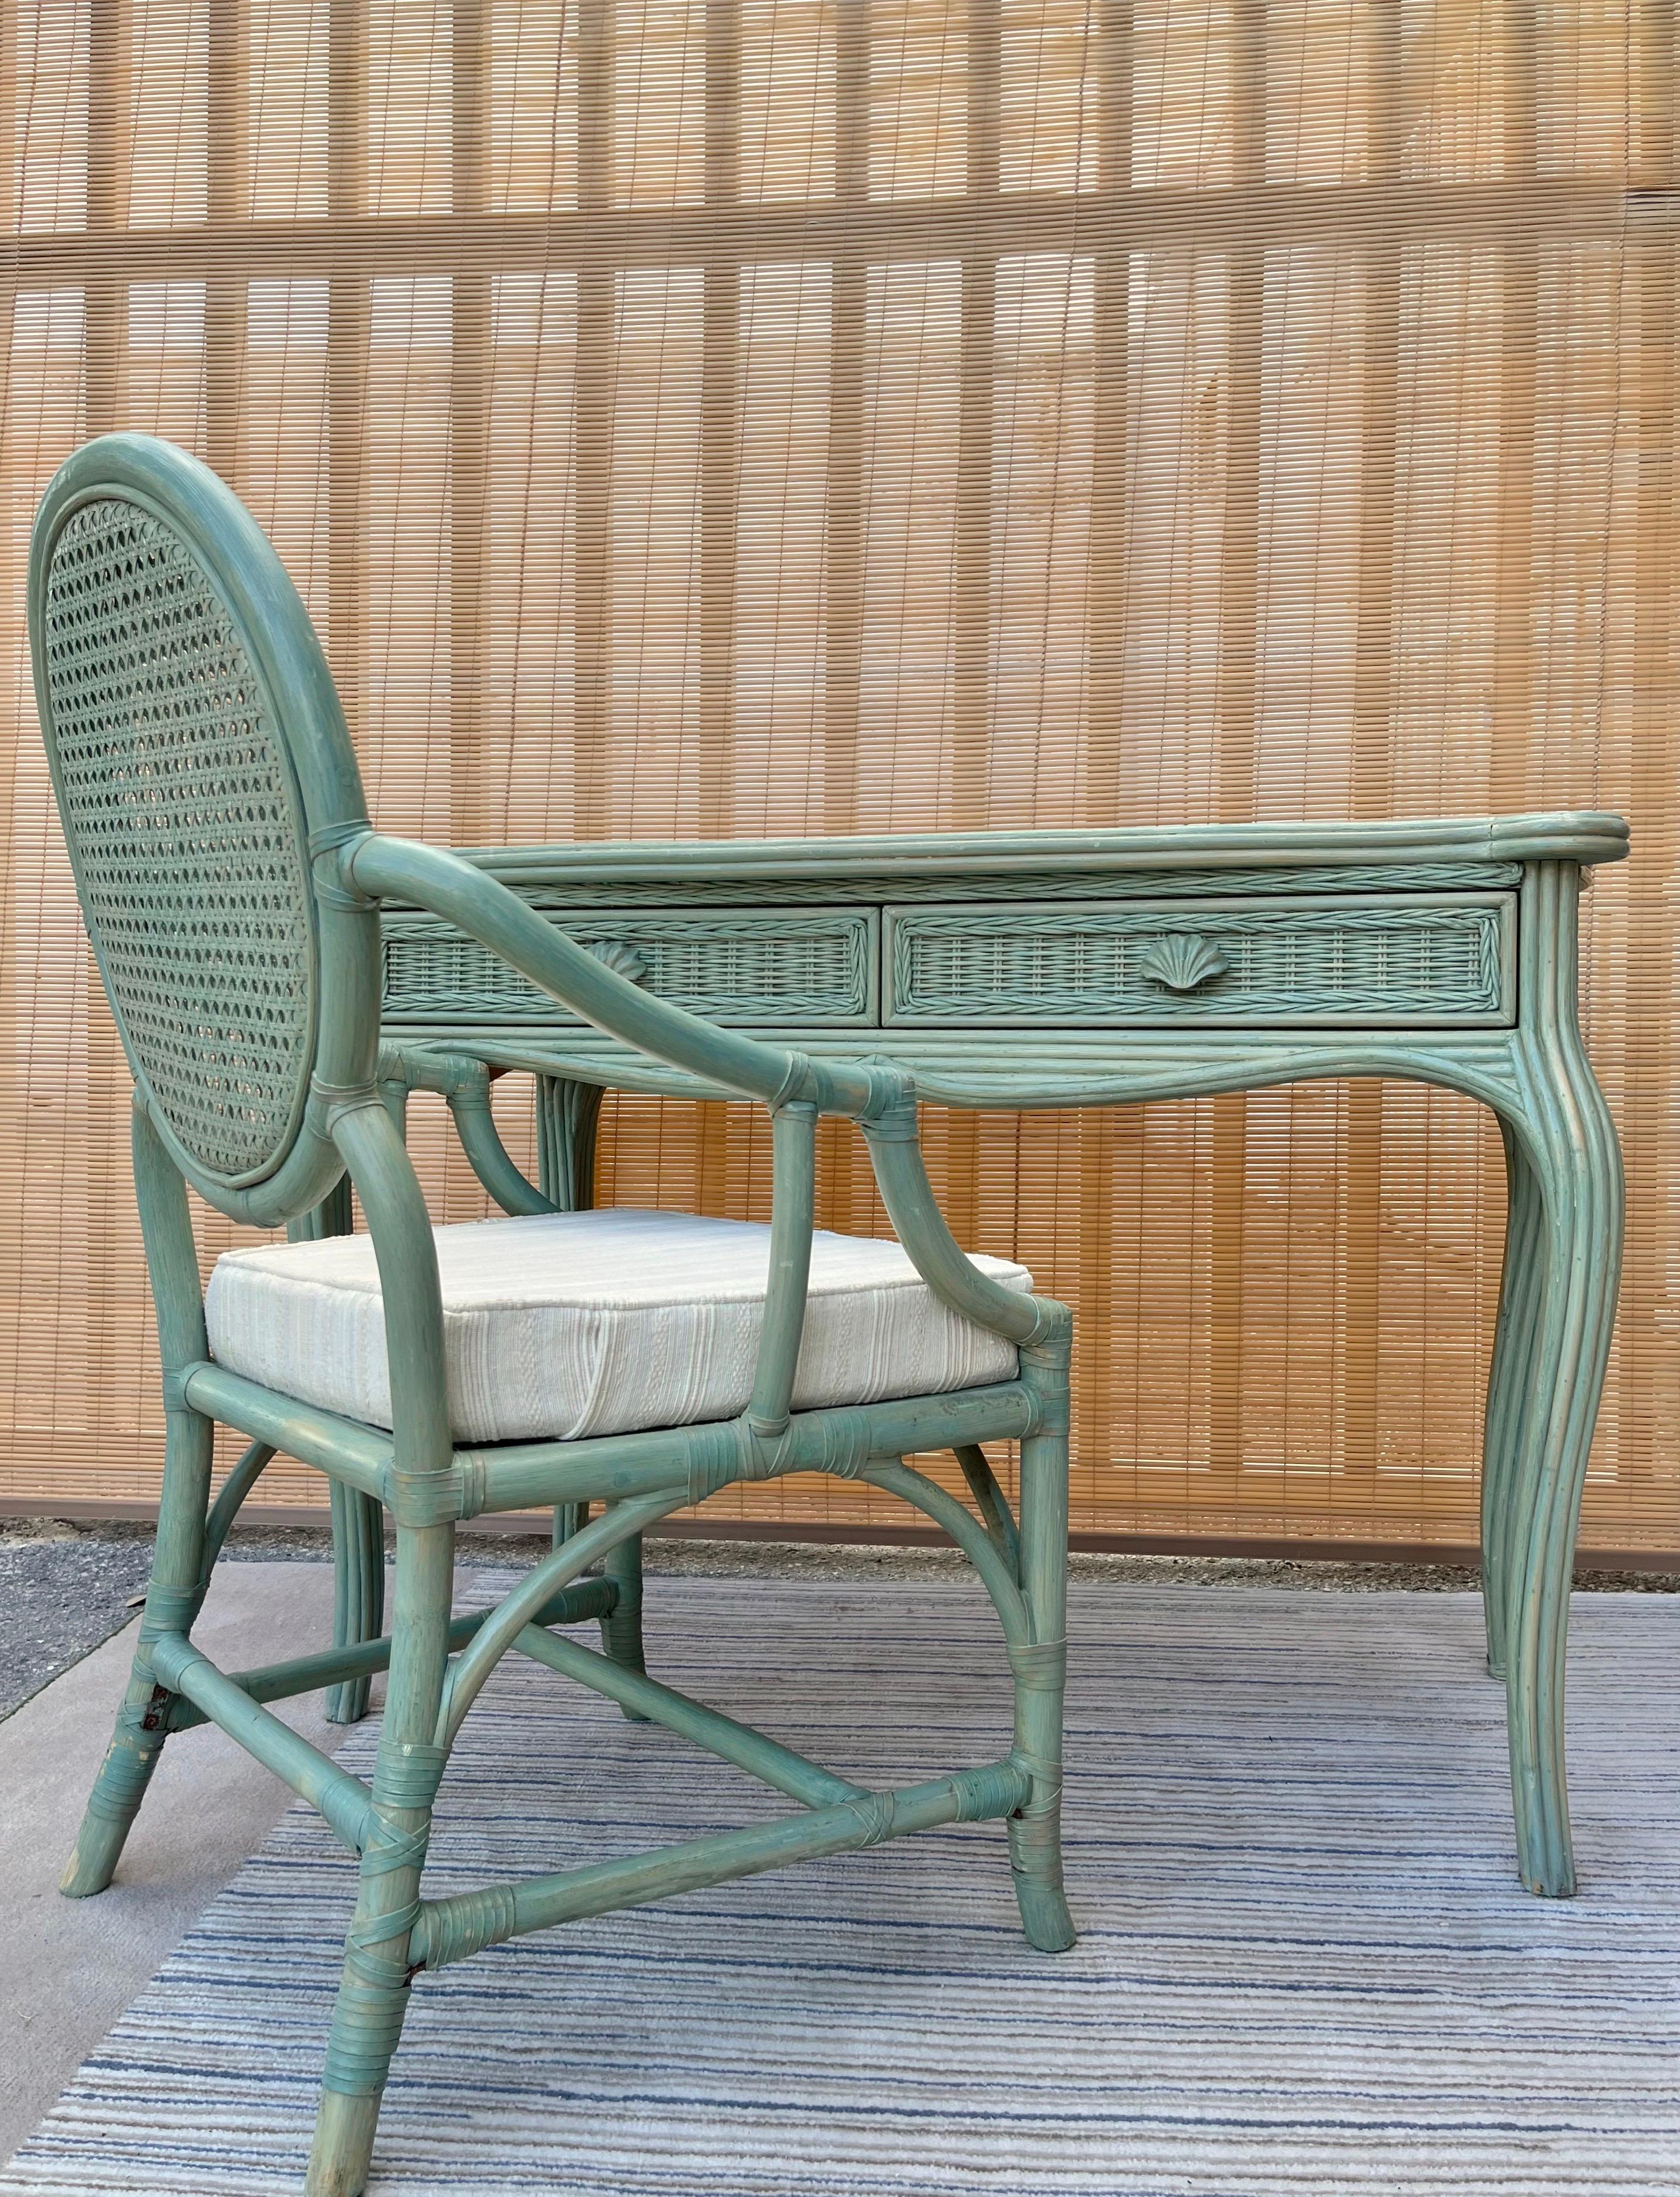 Vintage coastal style pencil reed and wicker vanity / writing desk with chair by Whitecraft Furniture. Circa 1980s 
The Vanity / Writing Desk features two drawers with hand carved seashell pulls, a removable glass top, and a unique washed pastel